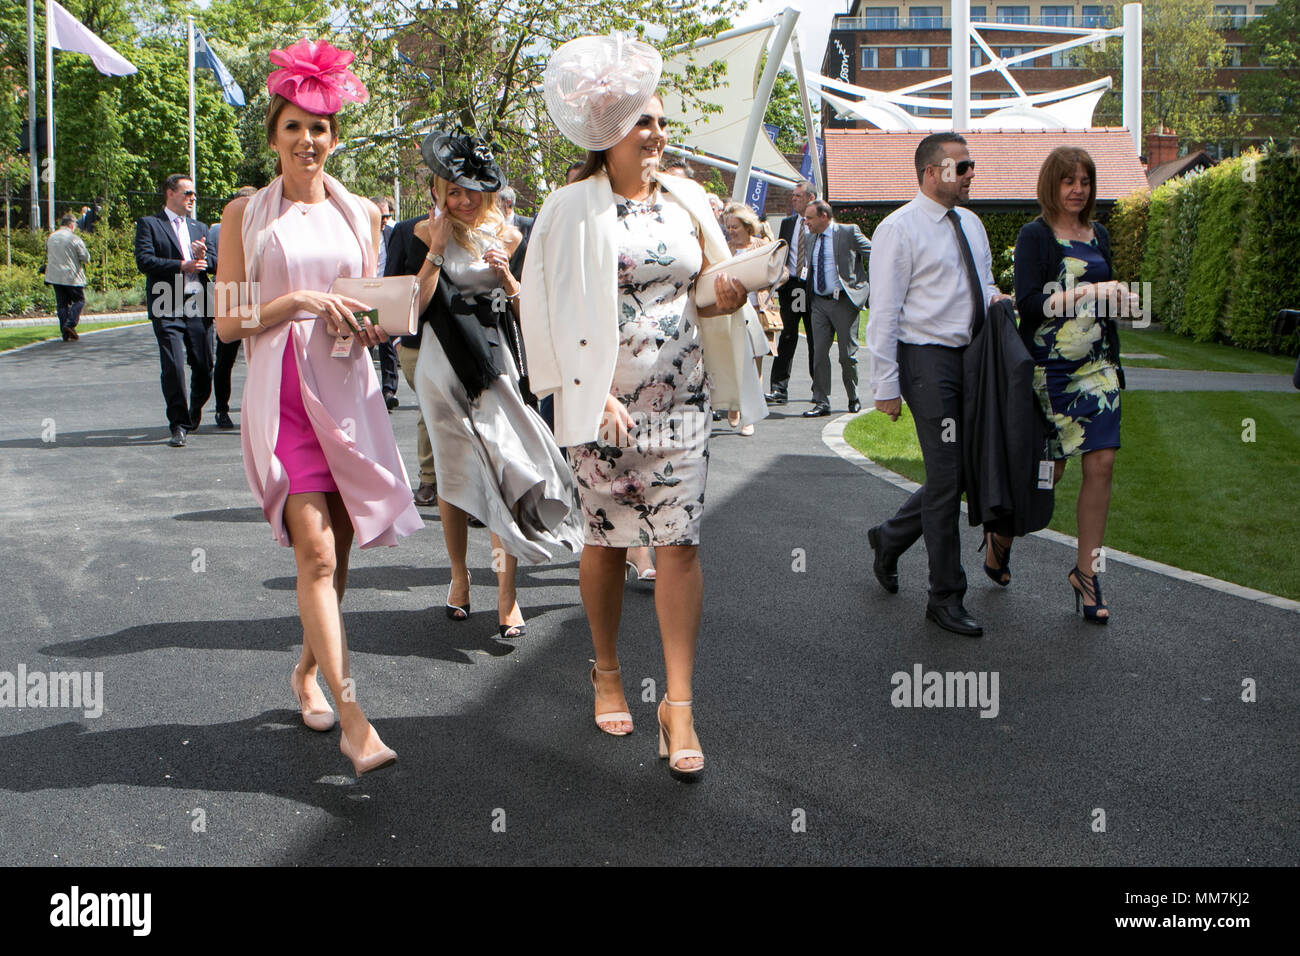 Boodles May Festival, Ladies Day Chester Races. Chester, UK. 10th May 2018.  Ladies Day gets under way in fine style on the second day of the Boodles May Festival at the Chester racecourse.  High spirits and fine fashions were the order of the day as racegoers flocked in to this fabulous event on the horse racing calendar in the beautiful city of Chester.  Credit: Cernan Elias/Alamy Live News Stock Photo